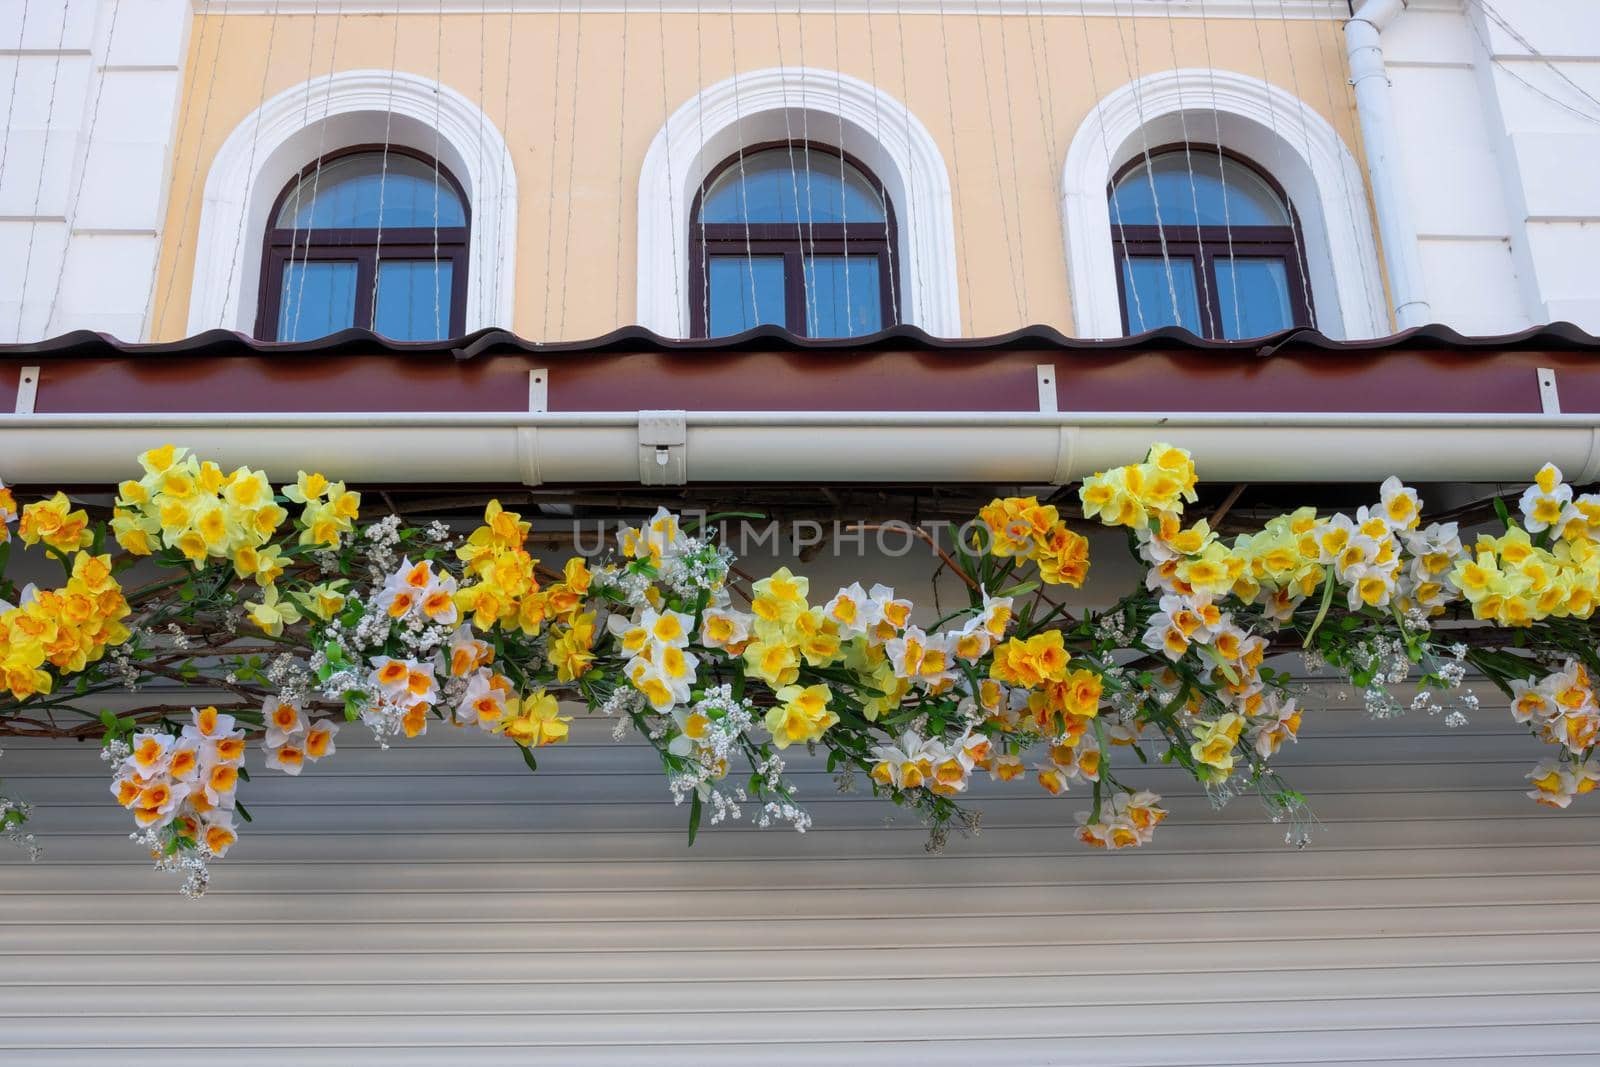 On the facade is a beautiful garland of artificial flowers white and yellow daffodils by lapushka62